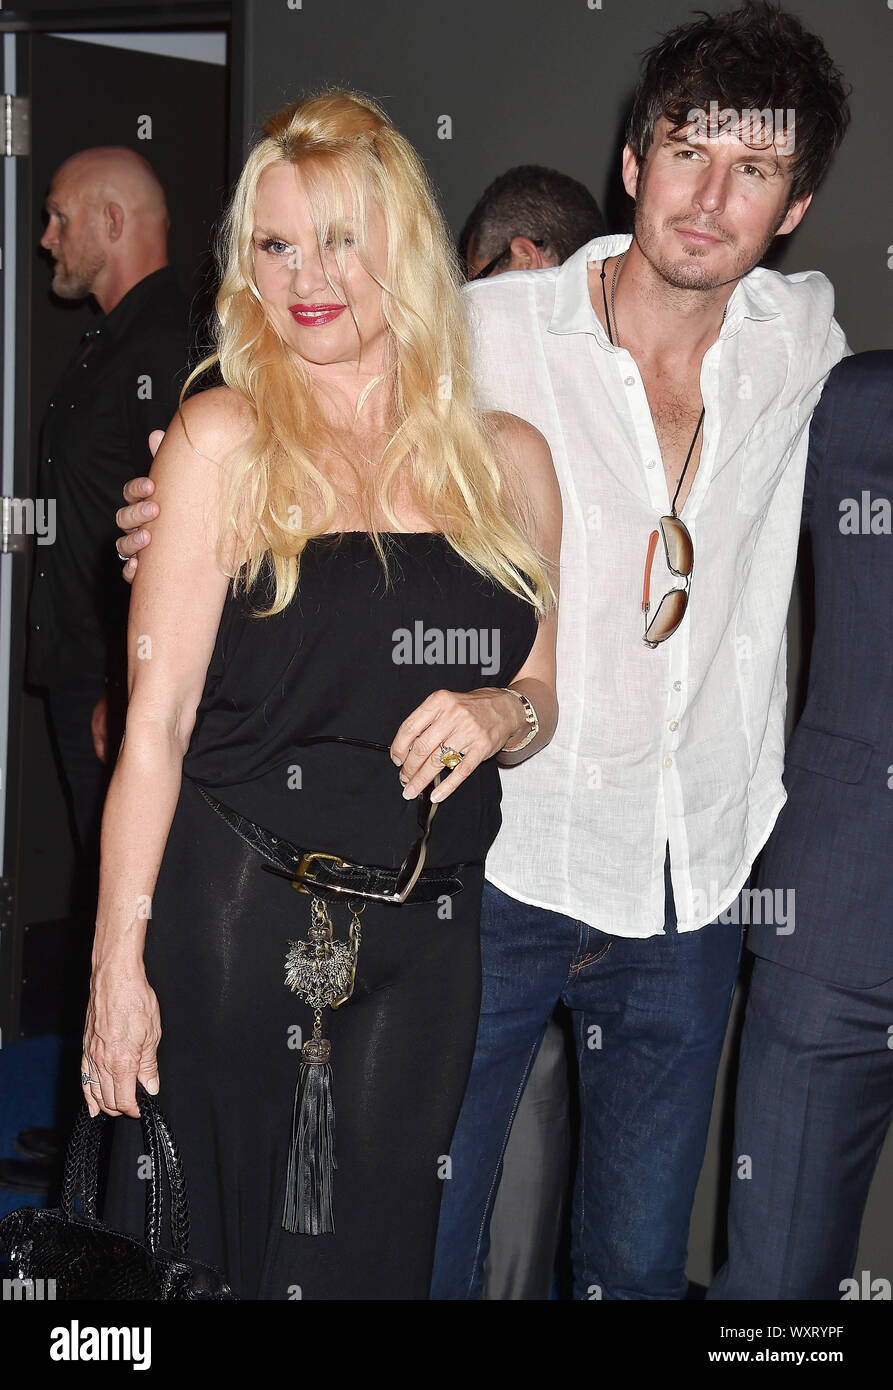 BEVERLY HILLS, CA - SEPTEMBER 16: Nicollette Sheridan (L) and Jake Marcus attend the Premiere Of Quiver Distribution's 'Running With The Devil' at Writers Guild Theater on September 16, 2019 in Beverly Hills, California. Stock Photo